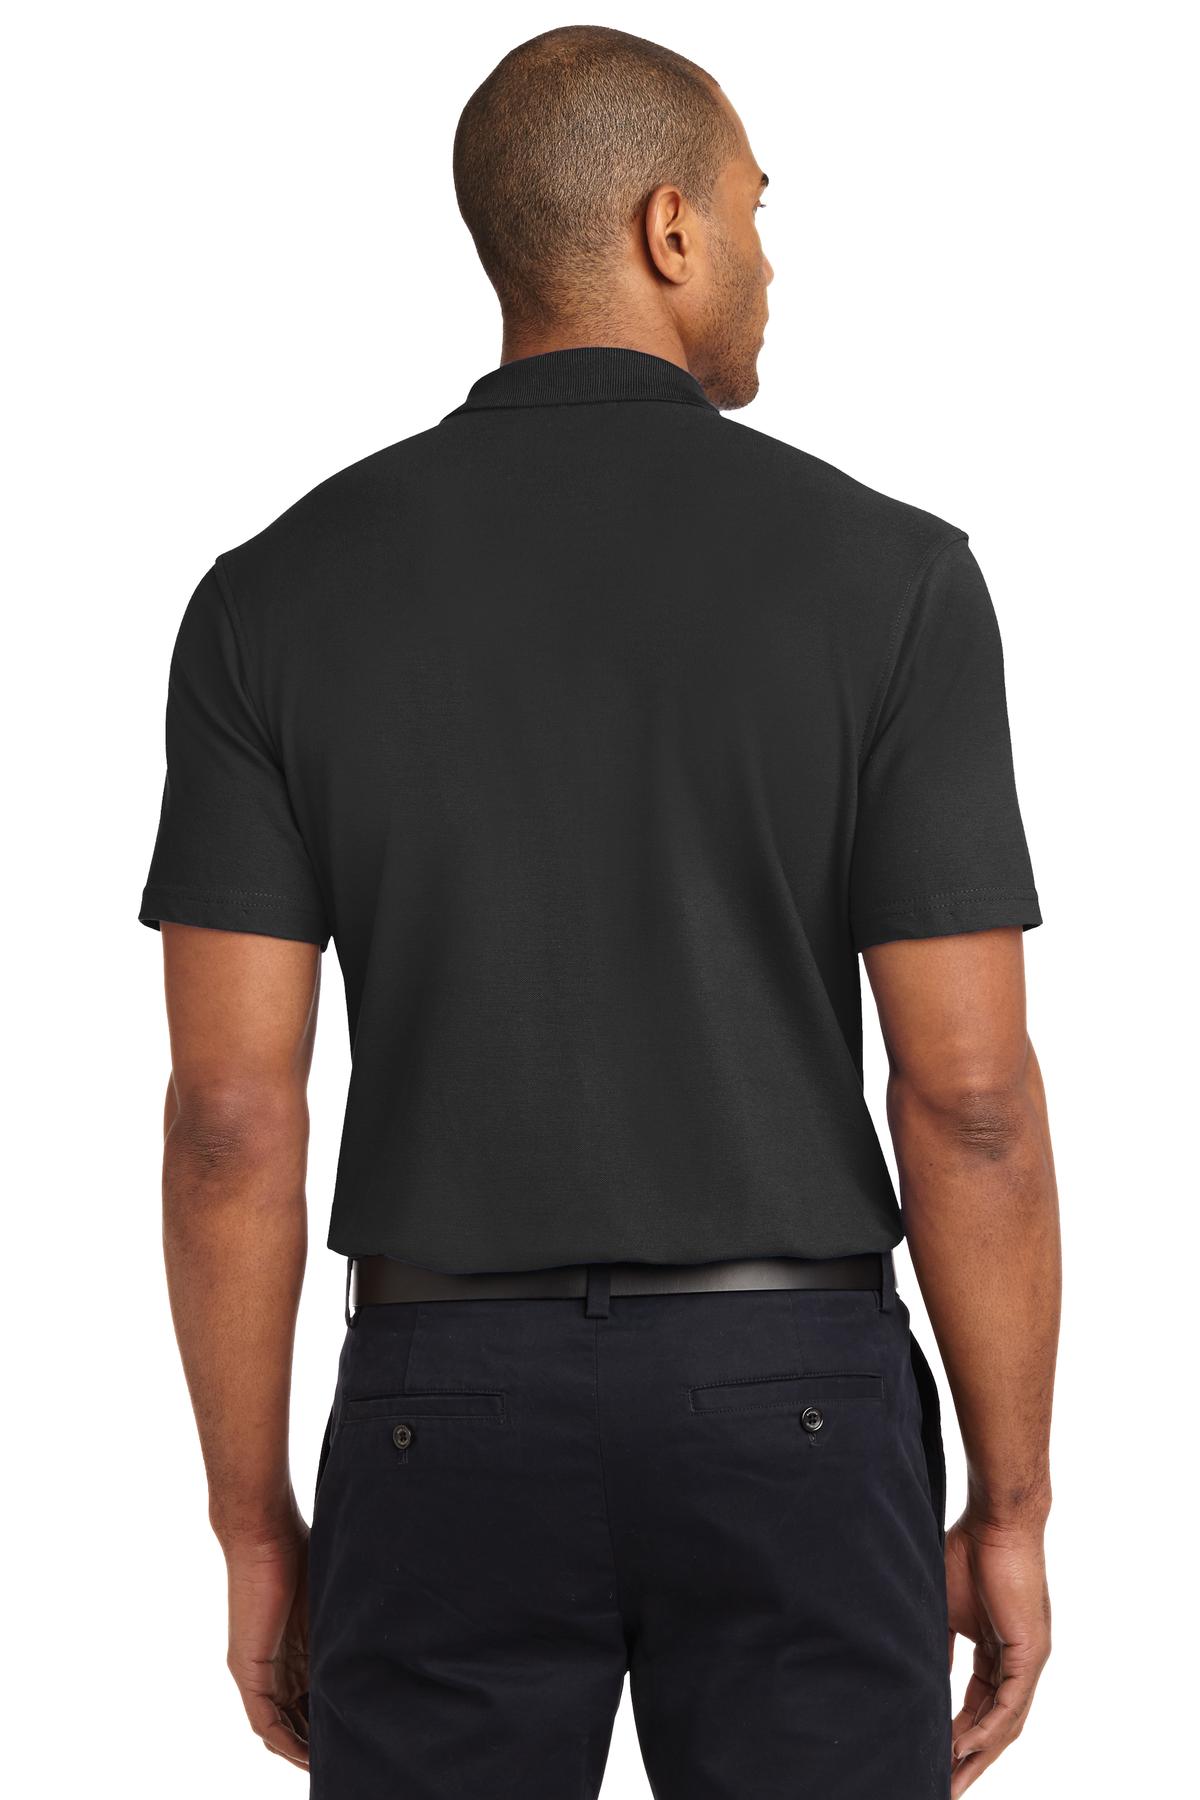 Port Authority Tall Stain-Release Polo. TLK510